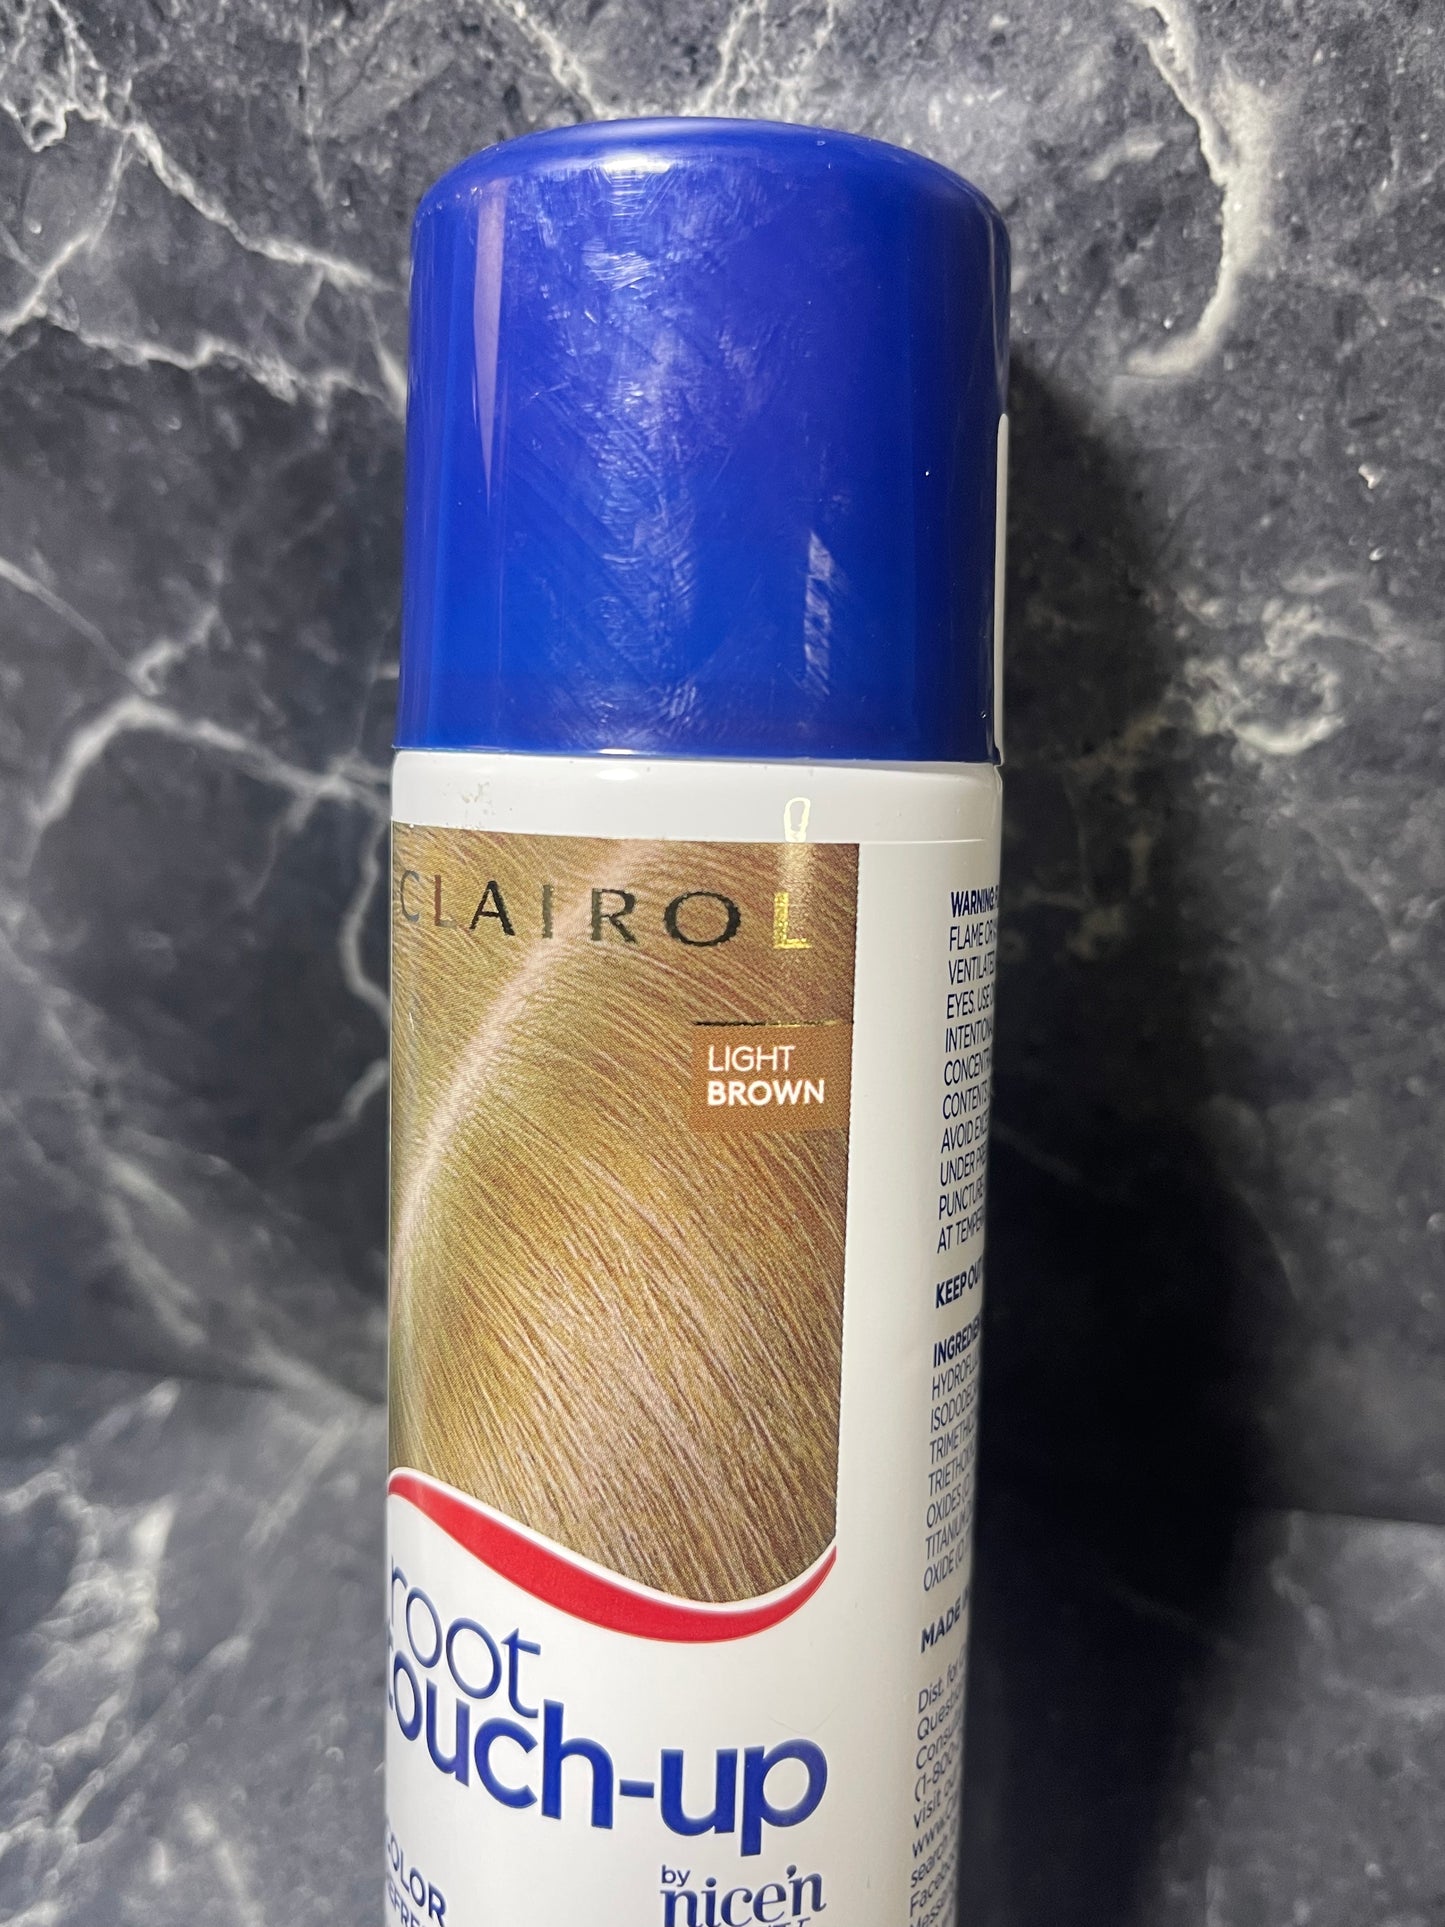 Clairol Root Touch-up Color Refreshing Hair Spray Light Brown 3.7 oz